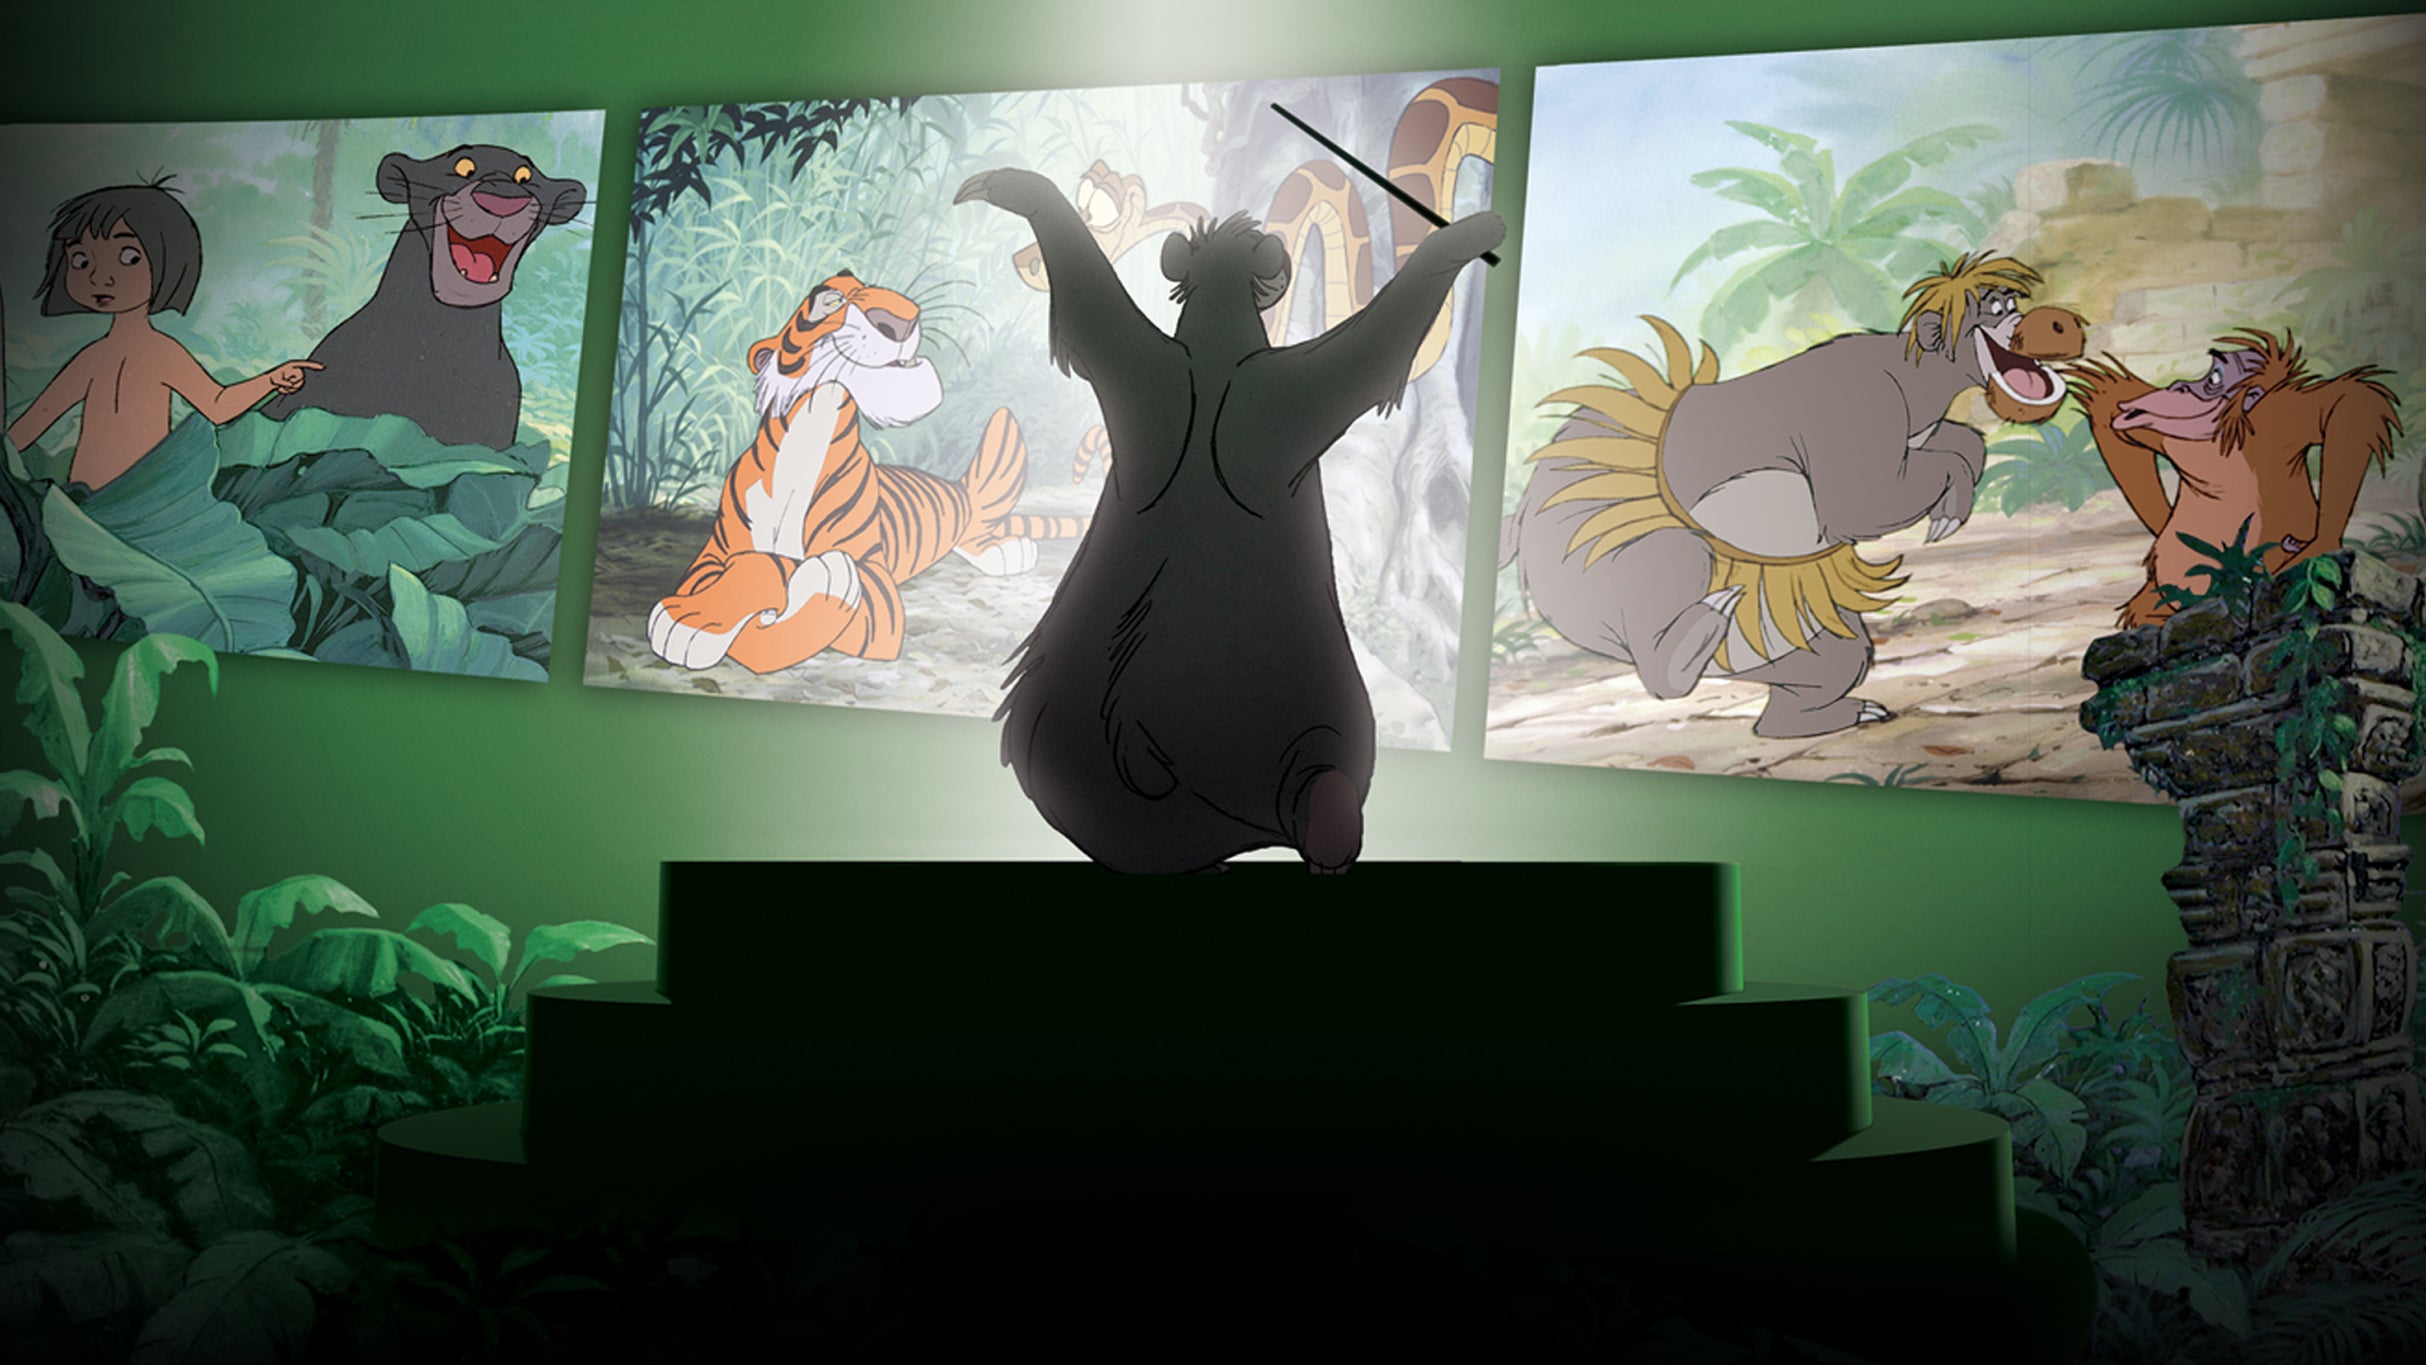 Disney In Concert: The Jungle Book Film With Live Orchestra in London promo photo for Ticketmaster presale offer code